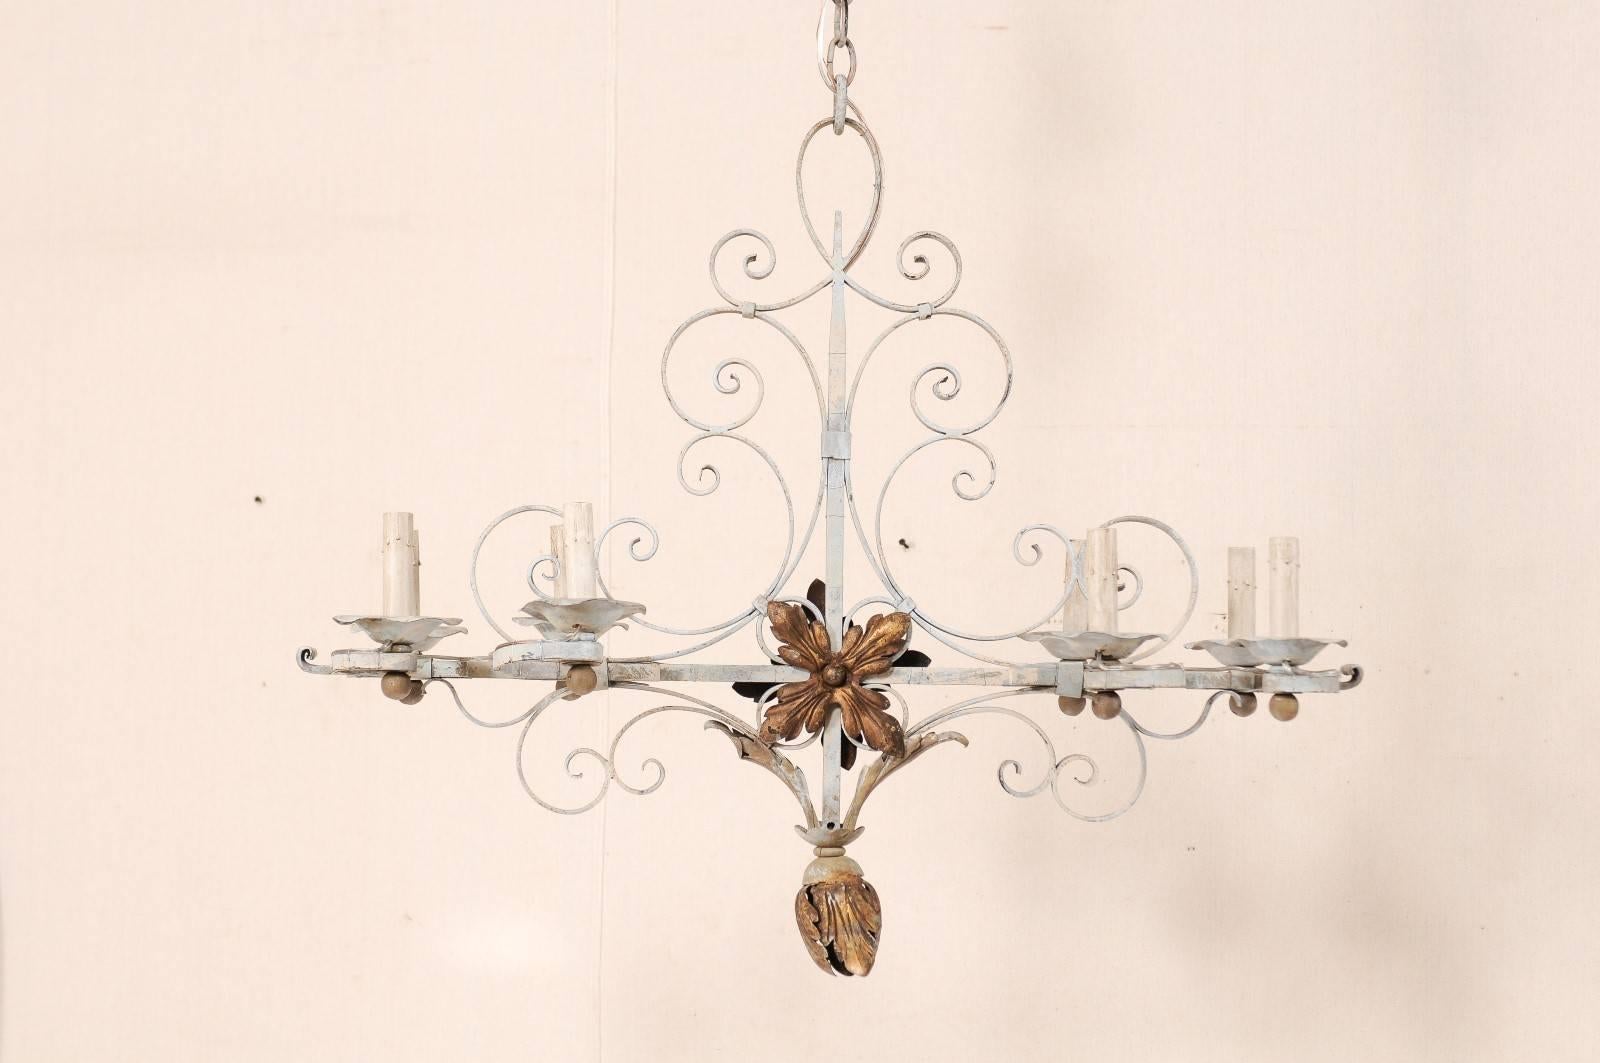 A vintage French eight-light painted iron chandelier. This French Mid-Century chandelier is made up of a series of intricate scrolls, which mingle and intertwine throughout the body. There are large accent flowers at the cross section of the